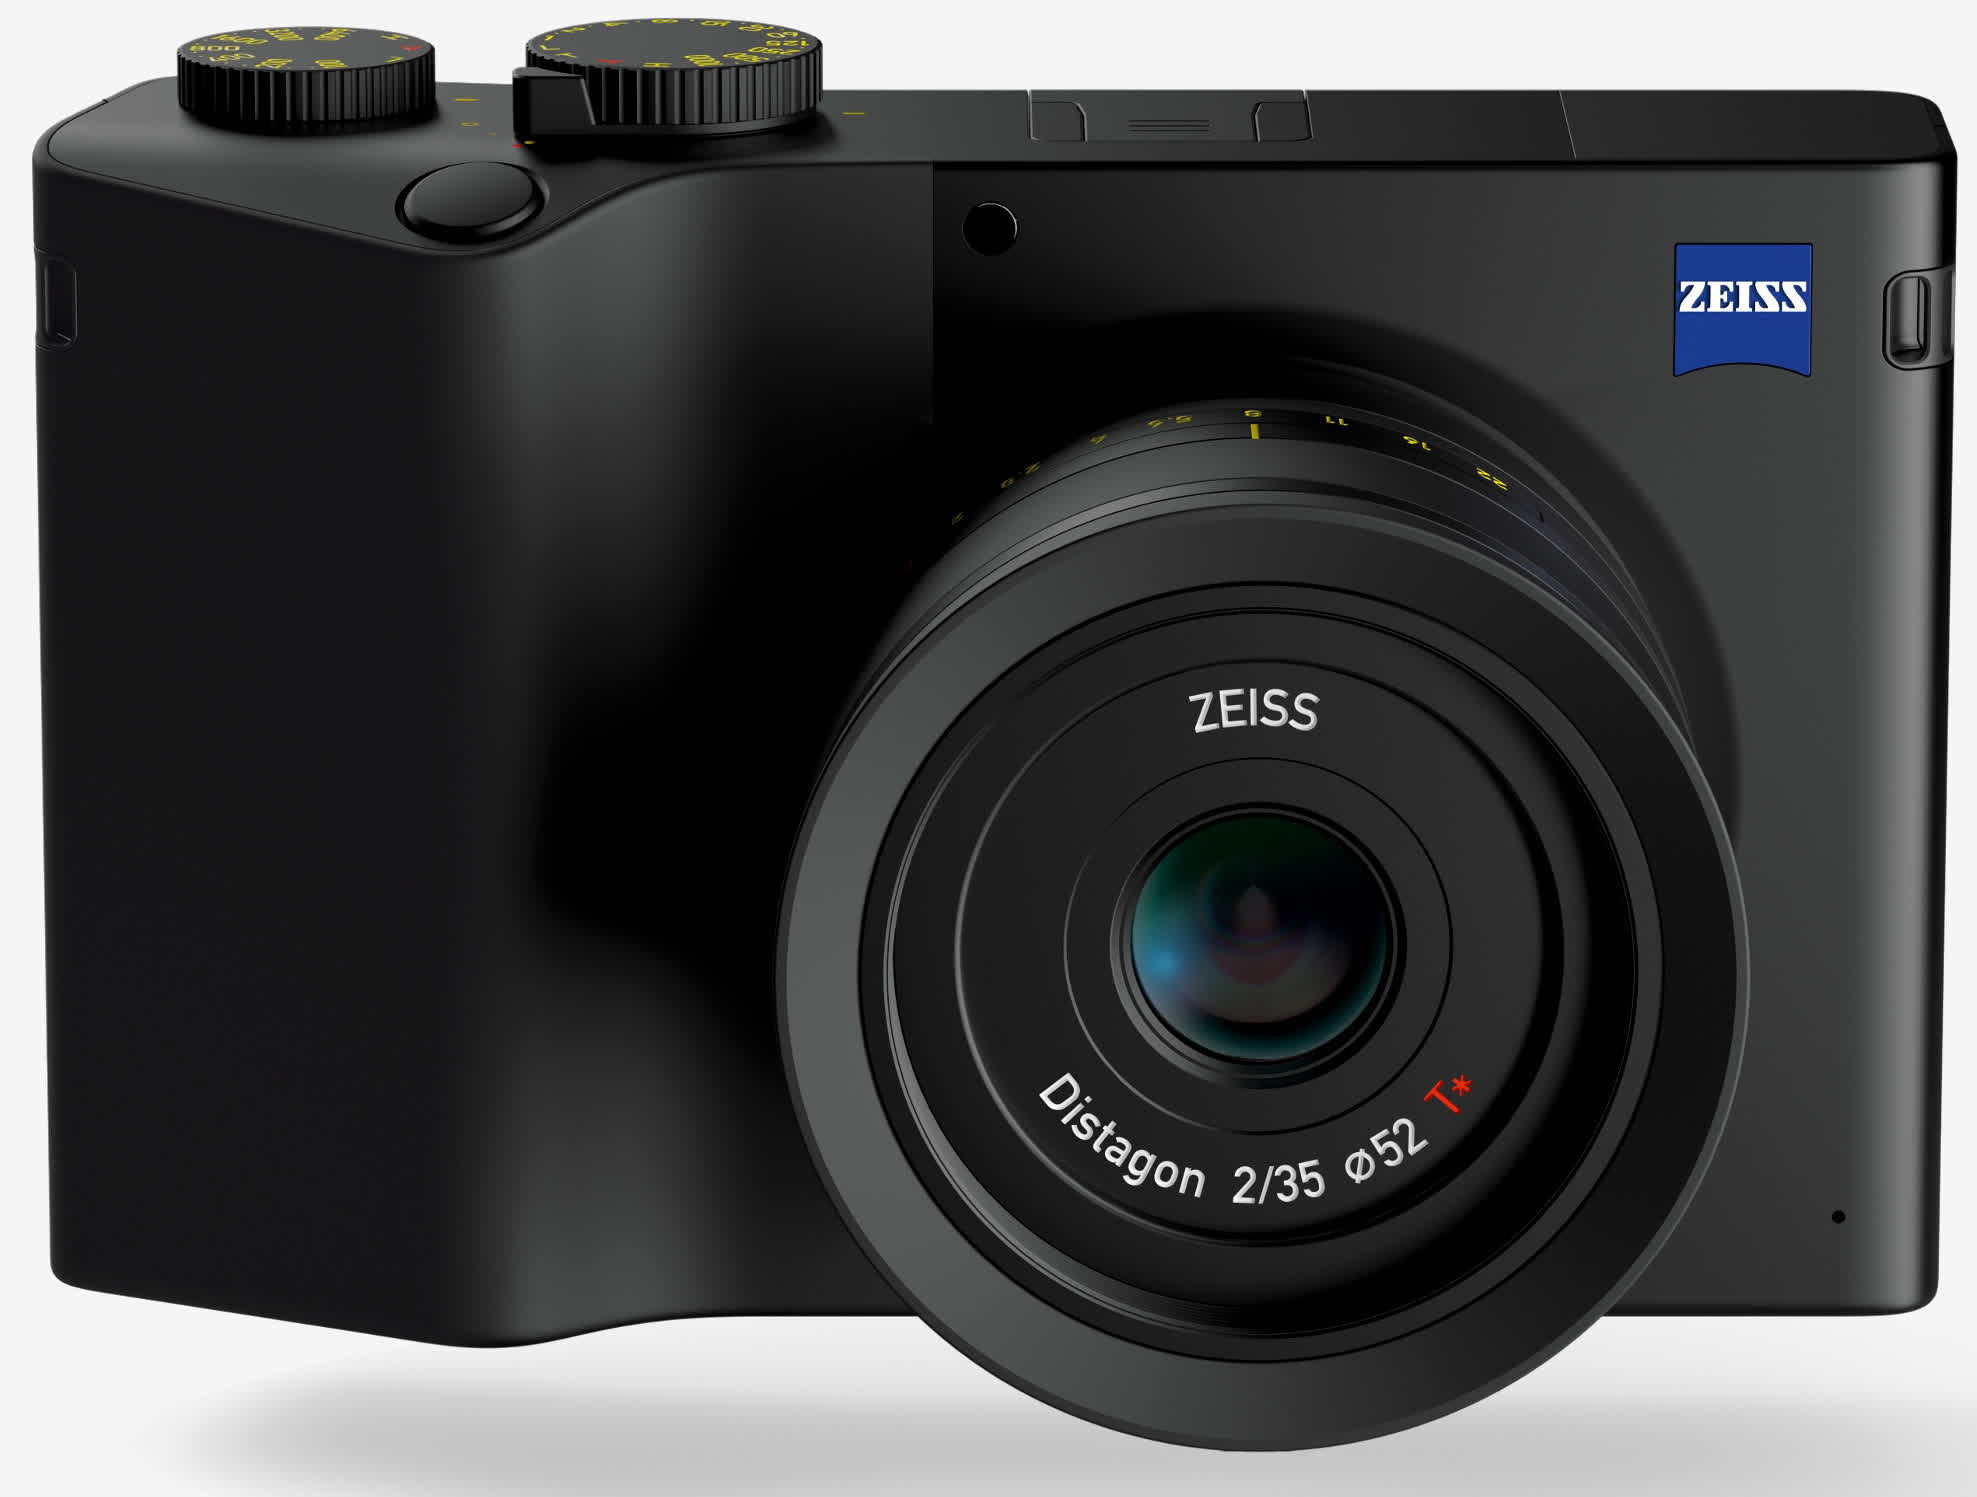 Zeiss' full-frame ZX1 mirrorless camera appears on B&H Photo